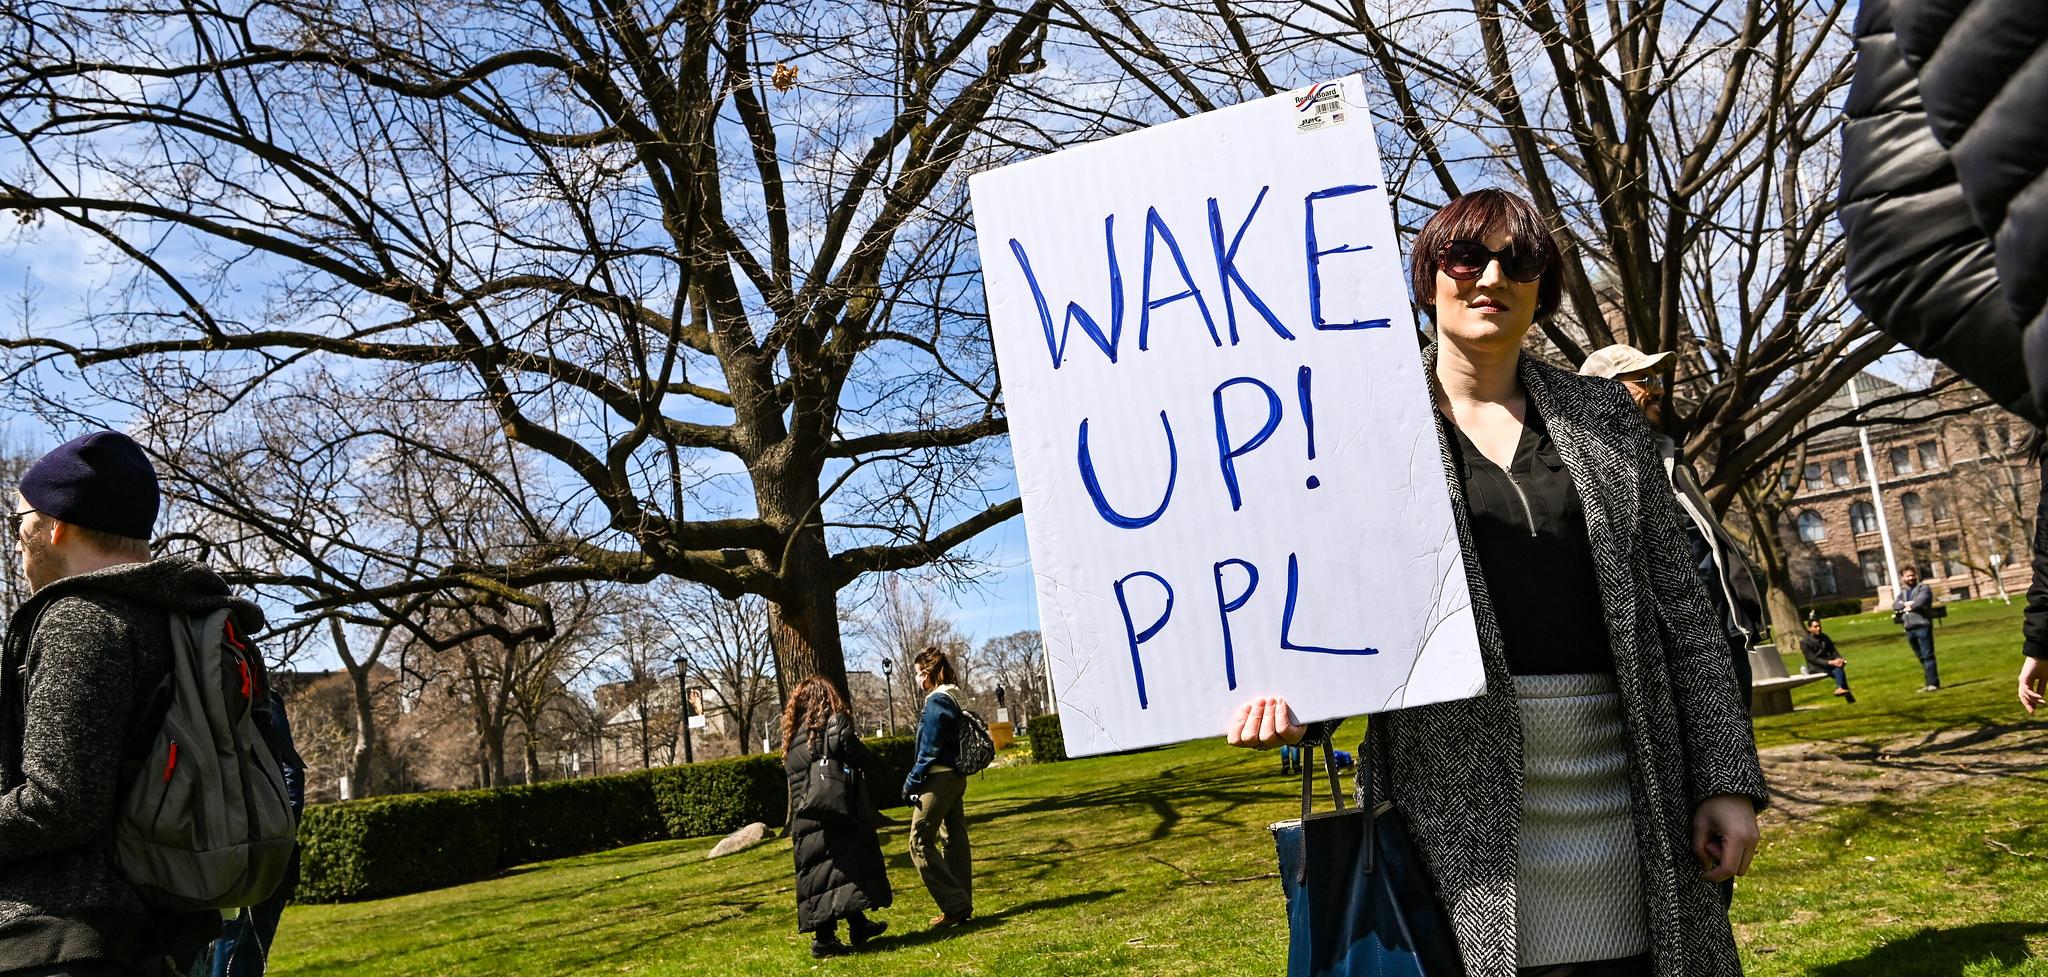 A woman holding a sign saying "Wake up! Ppl"